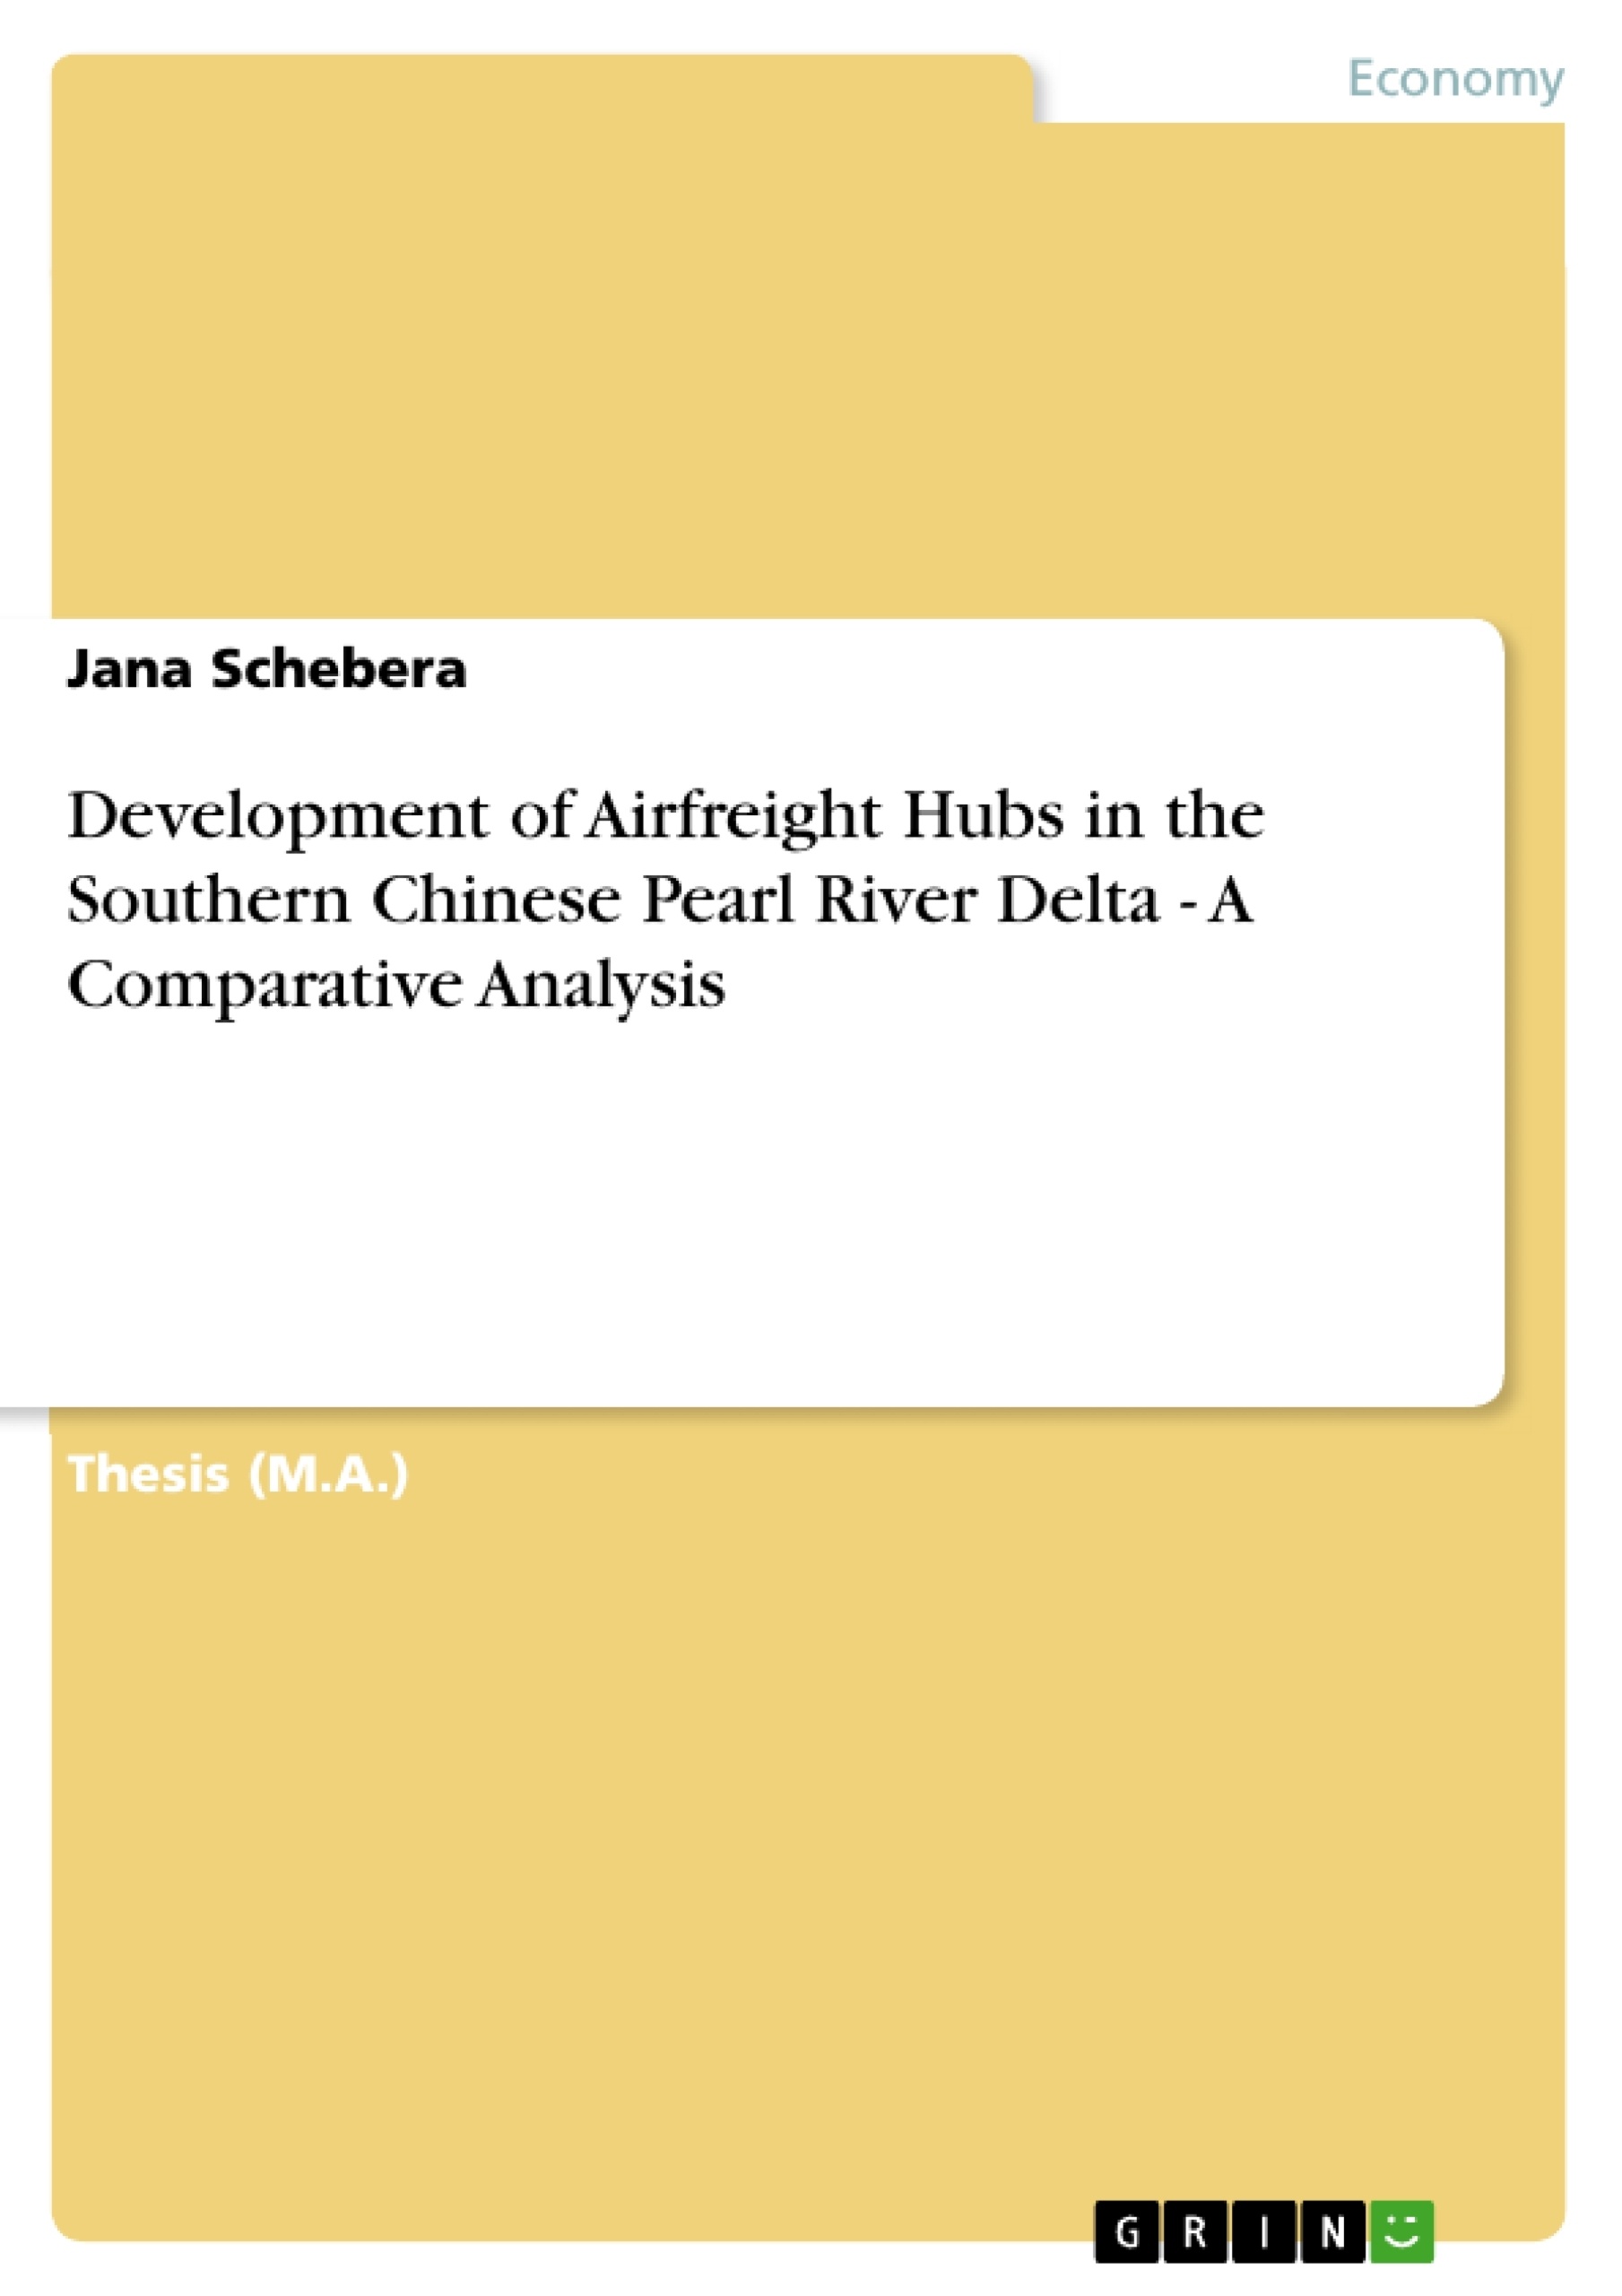 Title: Development of Airfreight Hubs in the Southern Chinese Pearl River Delta - A Comparative Analysis